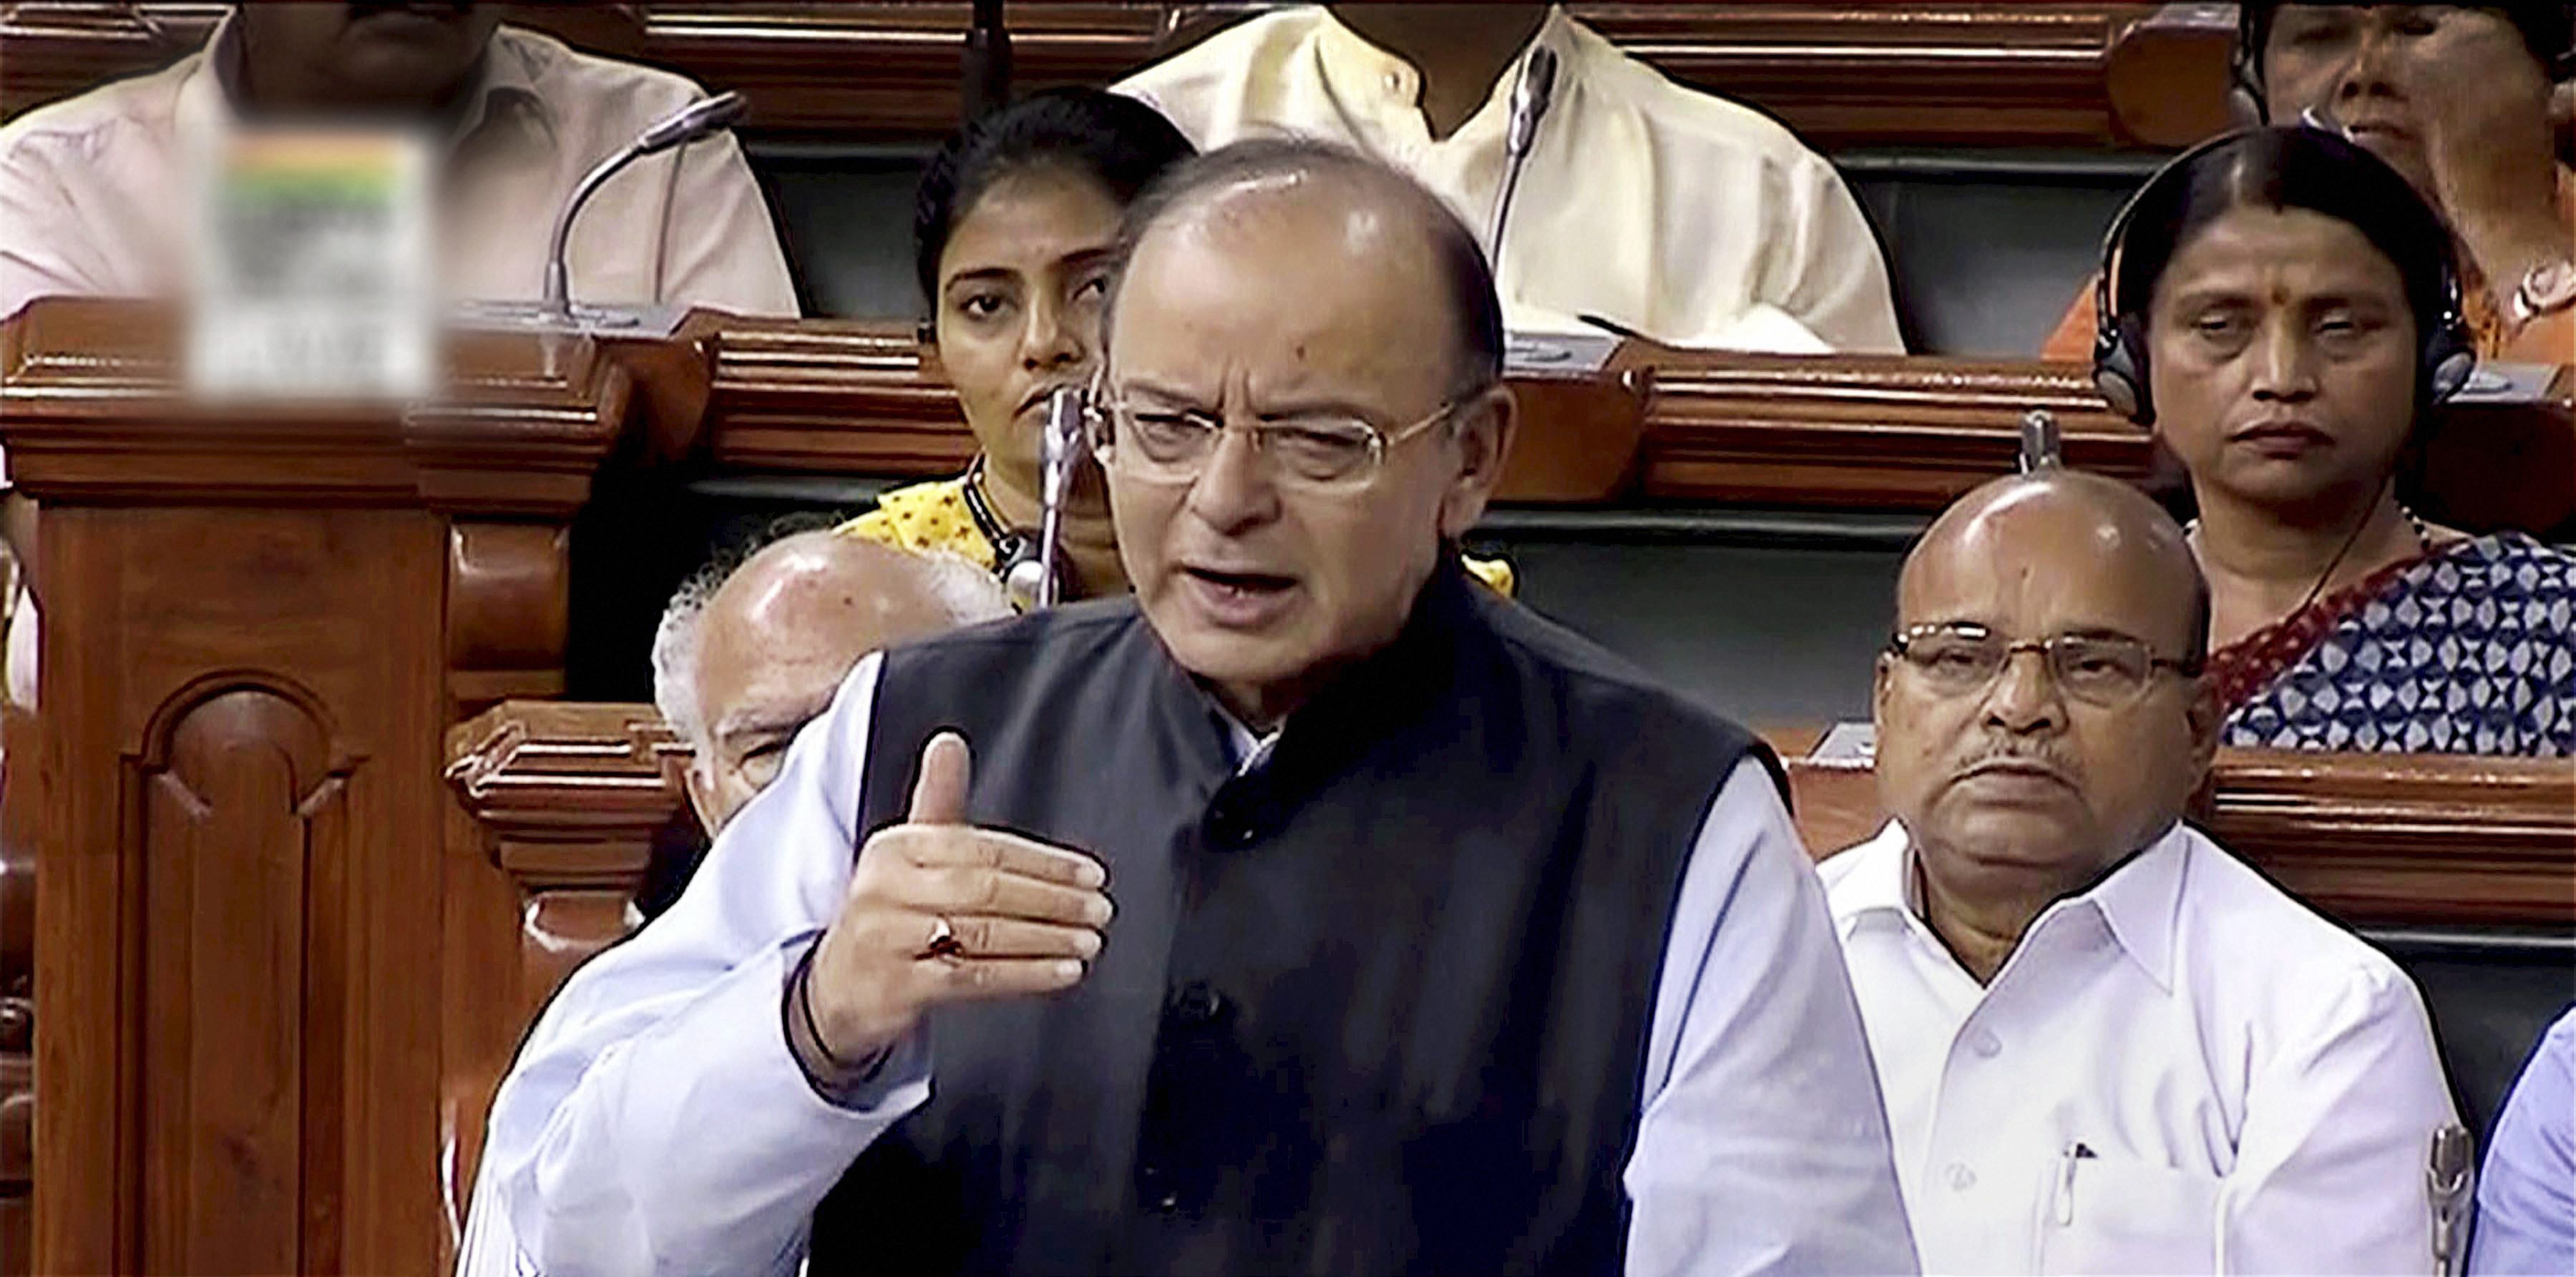 Reforms have no finishing line: India's Jaitley